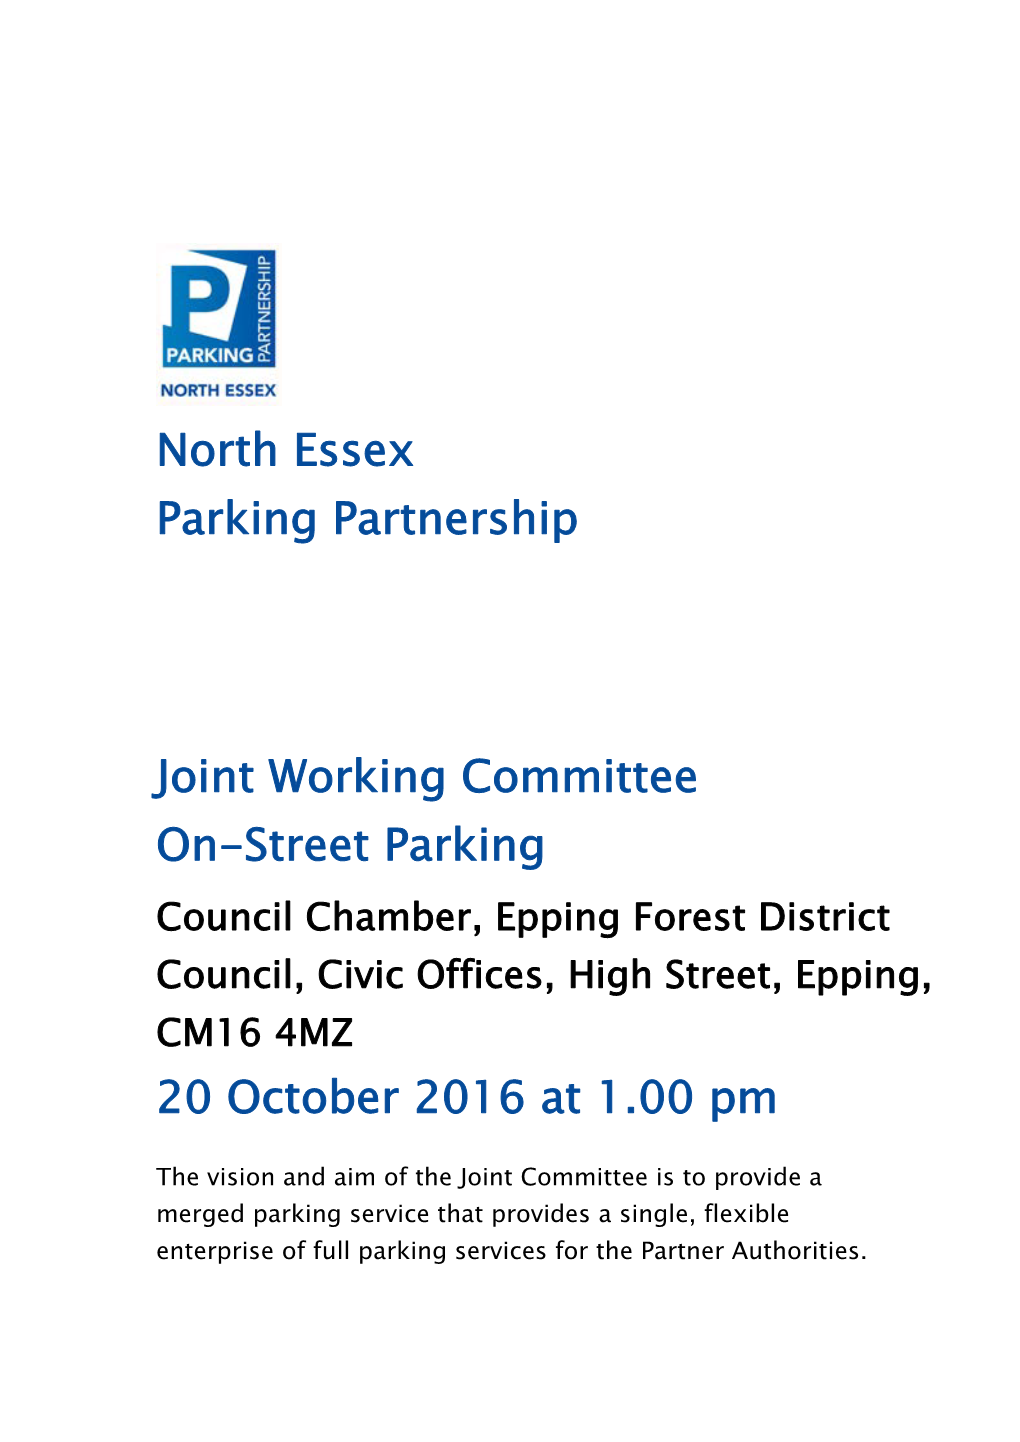 North Essex Parking Partnership Joint Working Committee On-Street Parking 20 October 2016 at 1.00 Pm